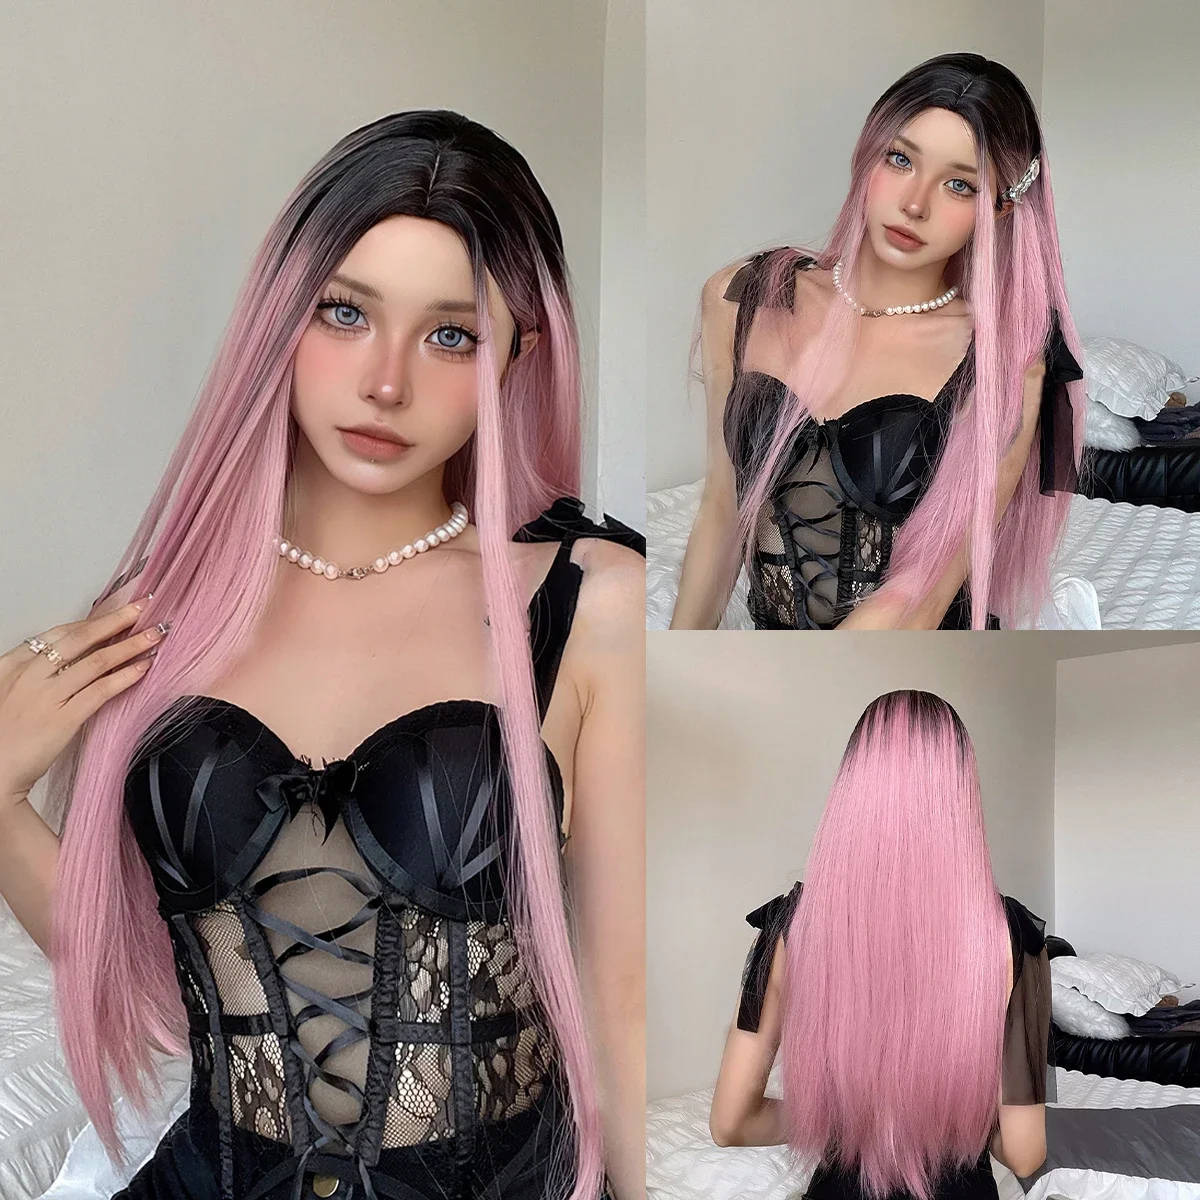 

14Color Lolita Long Straight Wig with Bangs Dark Roots Pink Silky Wigs Natural Middle Part Cosplay Party Hair Heat Resistant